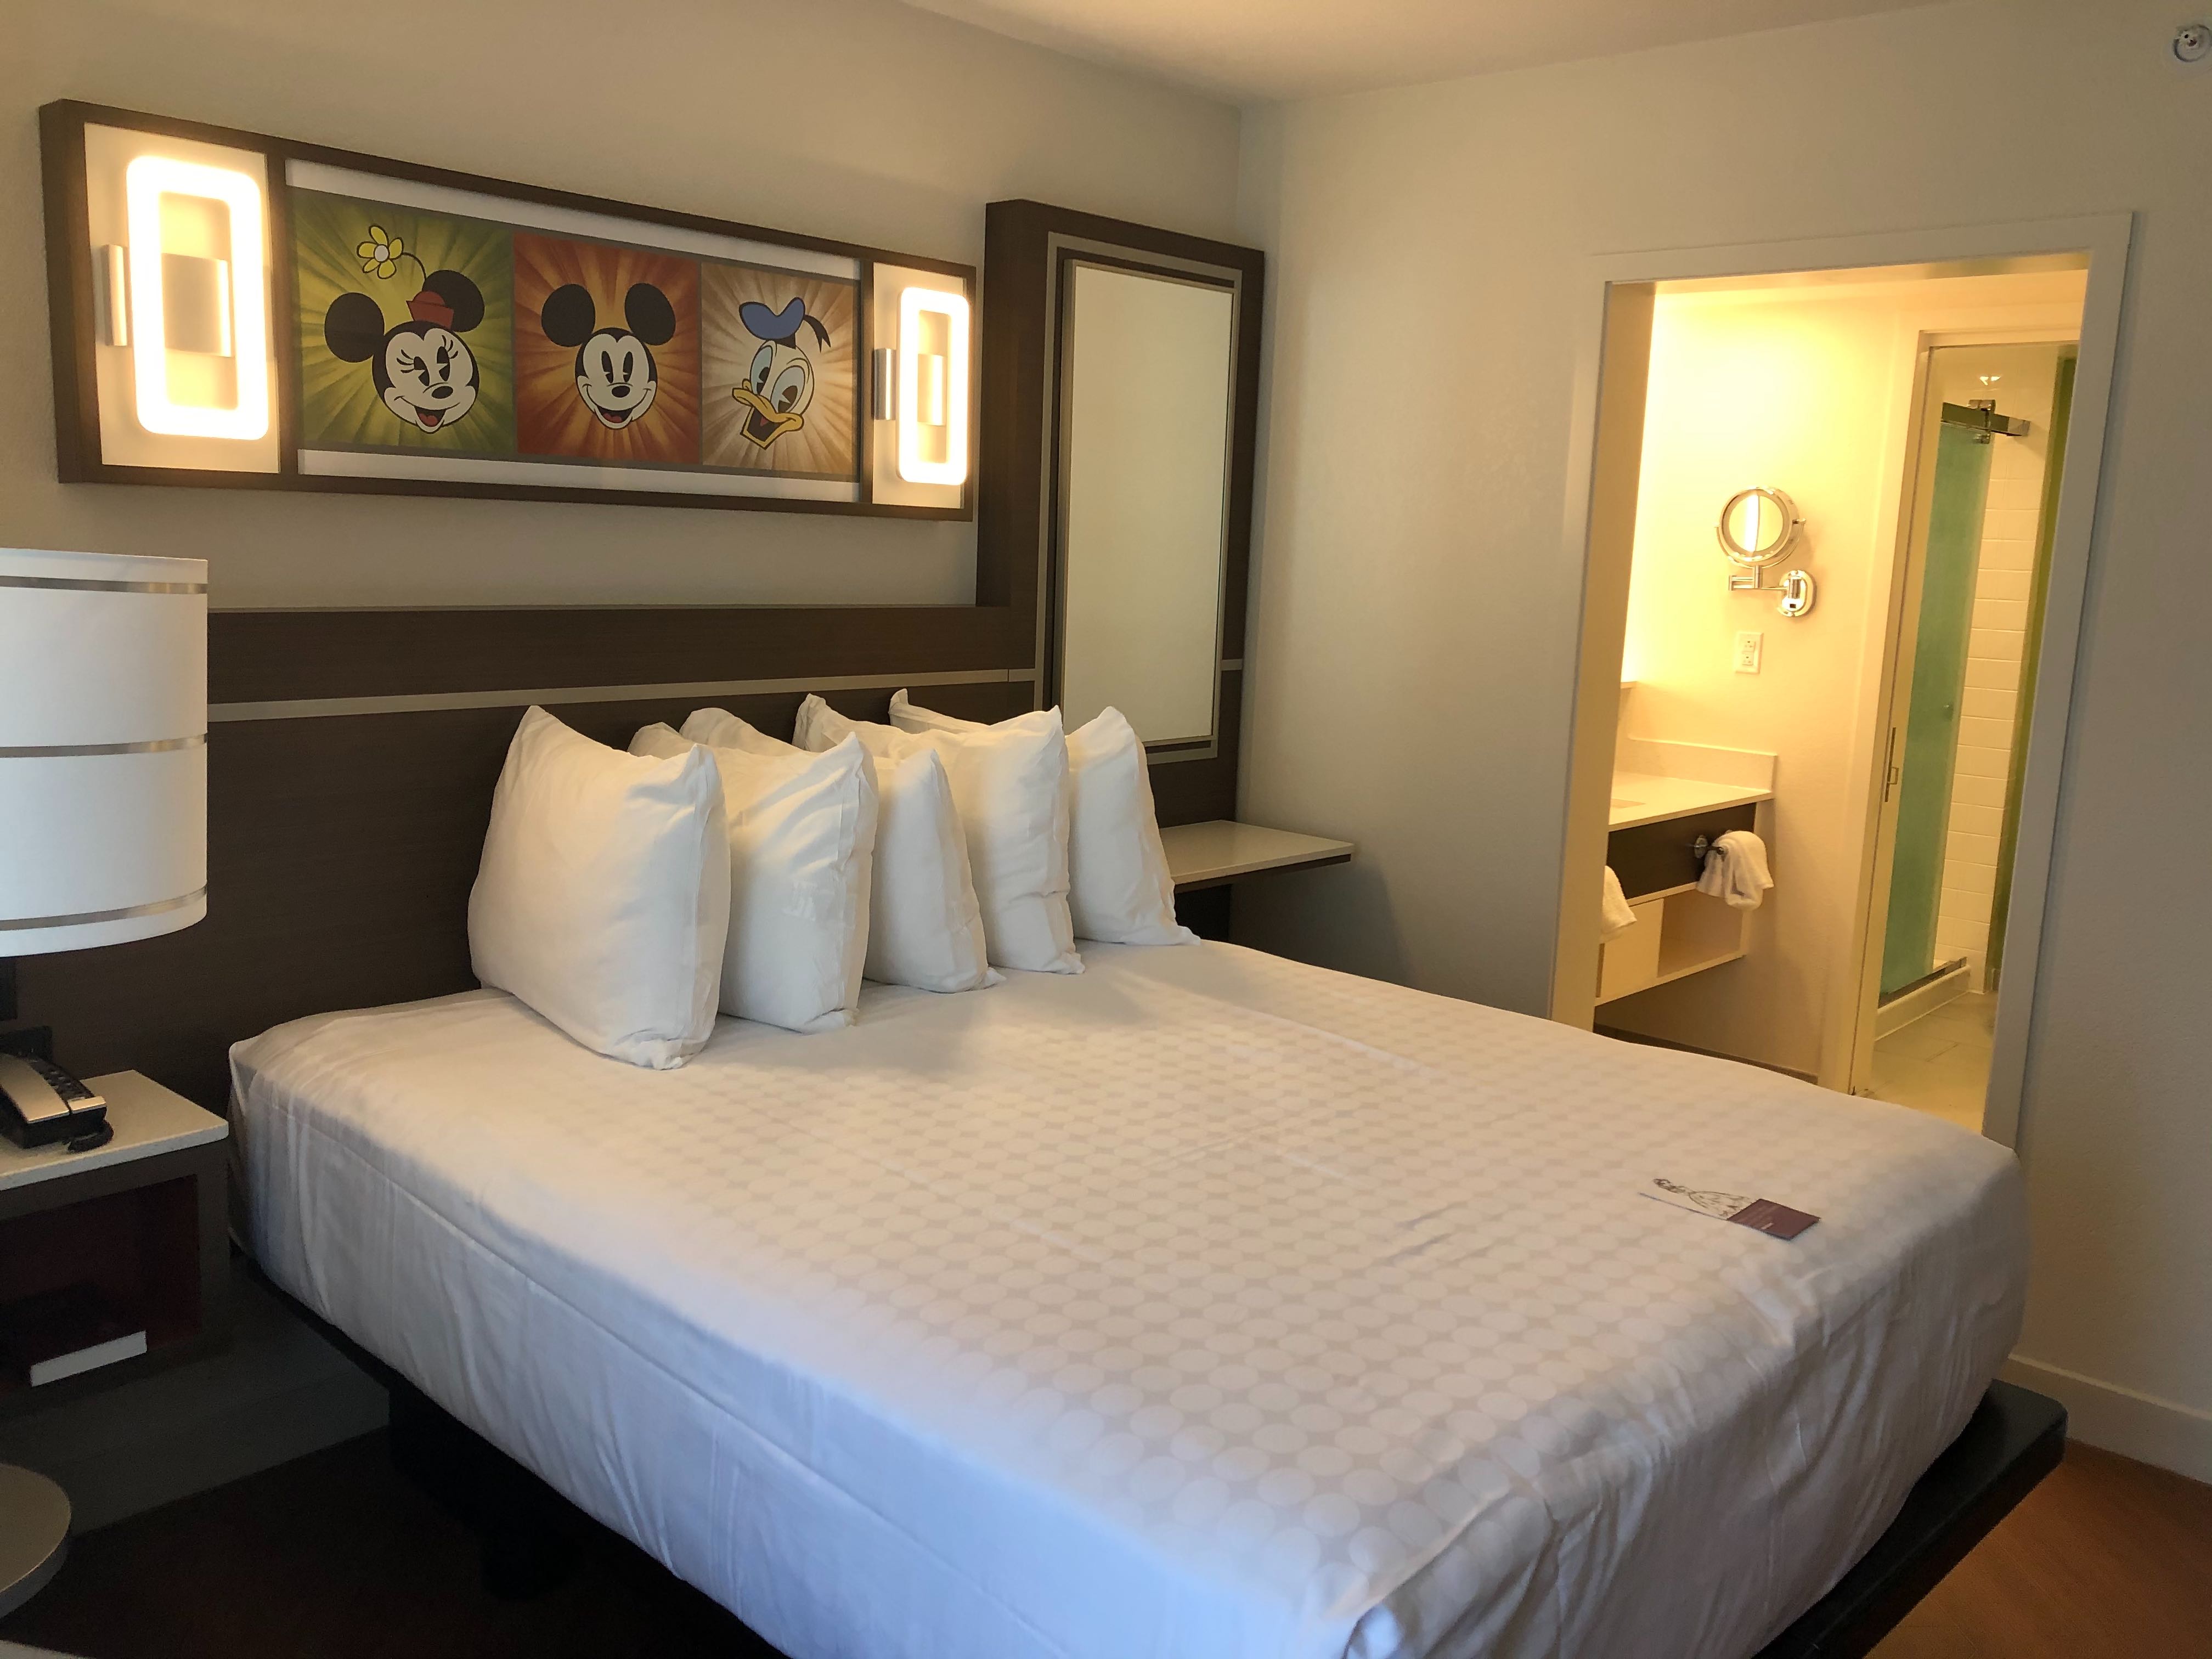 PHOTOS, VIDEO Tour a Newly Refurbished Family Suite at Disney's All